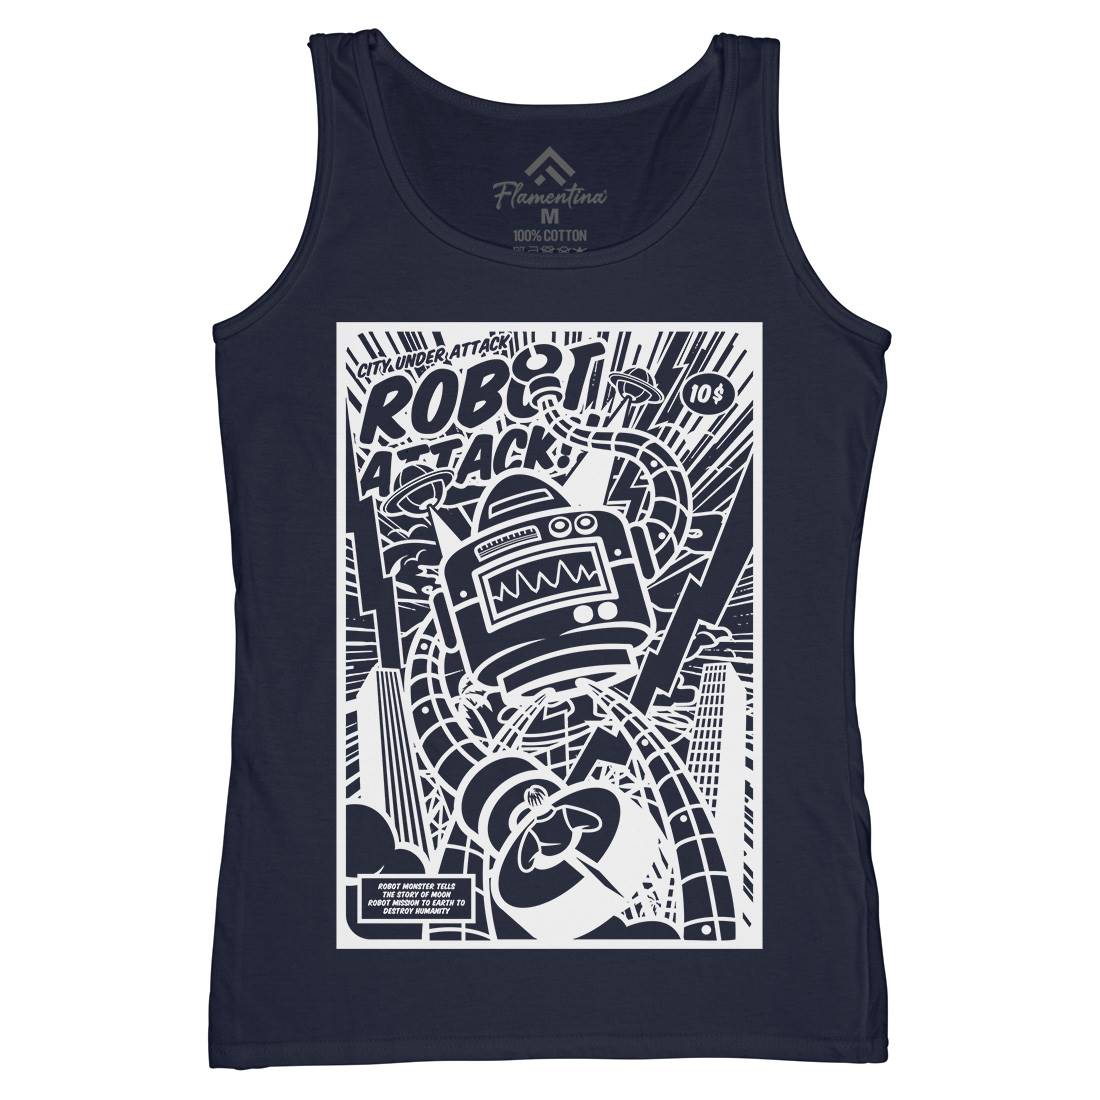 Robot Attack Womens Organic Tank Top Vest Space A271